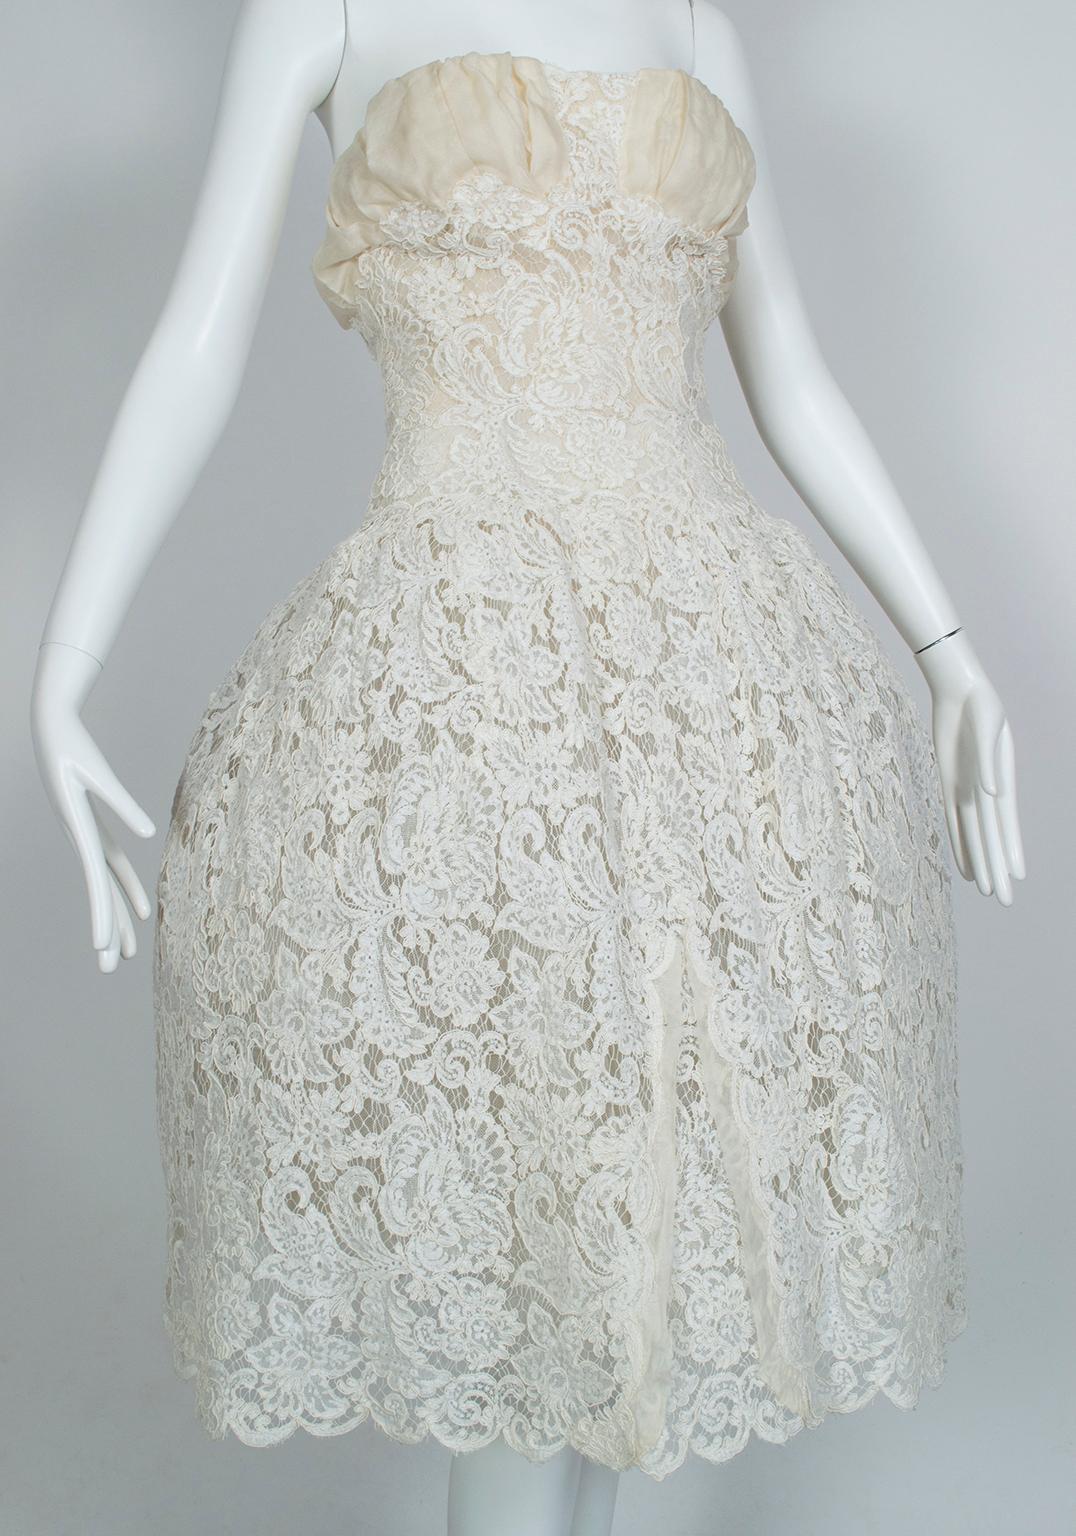 Strapless Ivory Guipure Lace Corseted Robe Française Wedding Dress - XS, 1950s 3